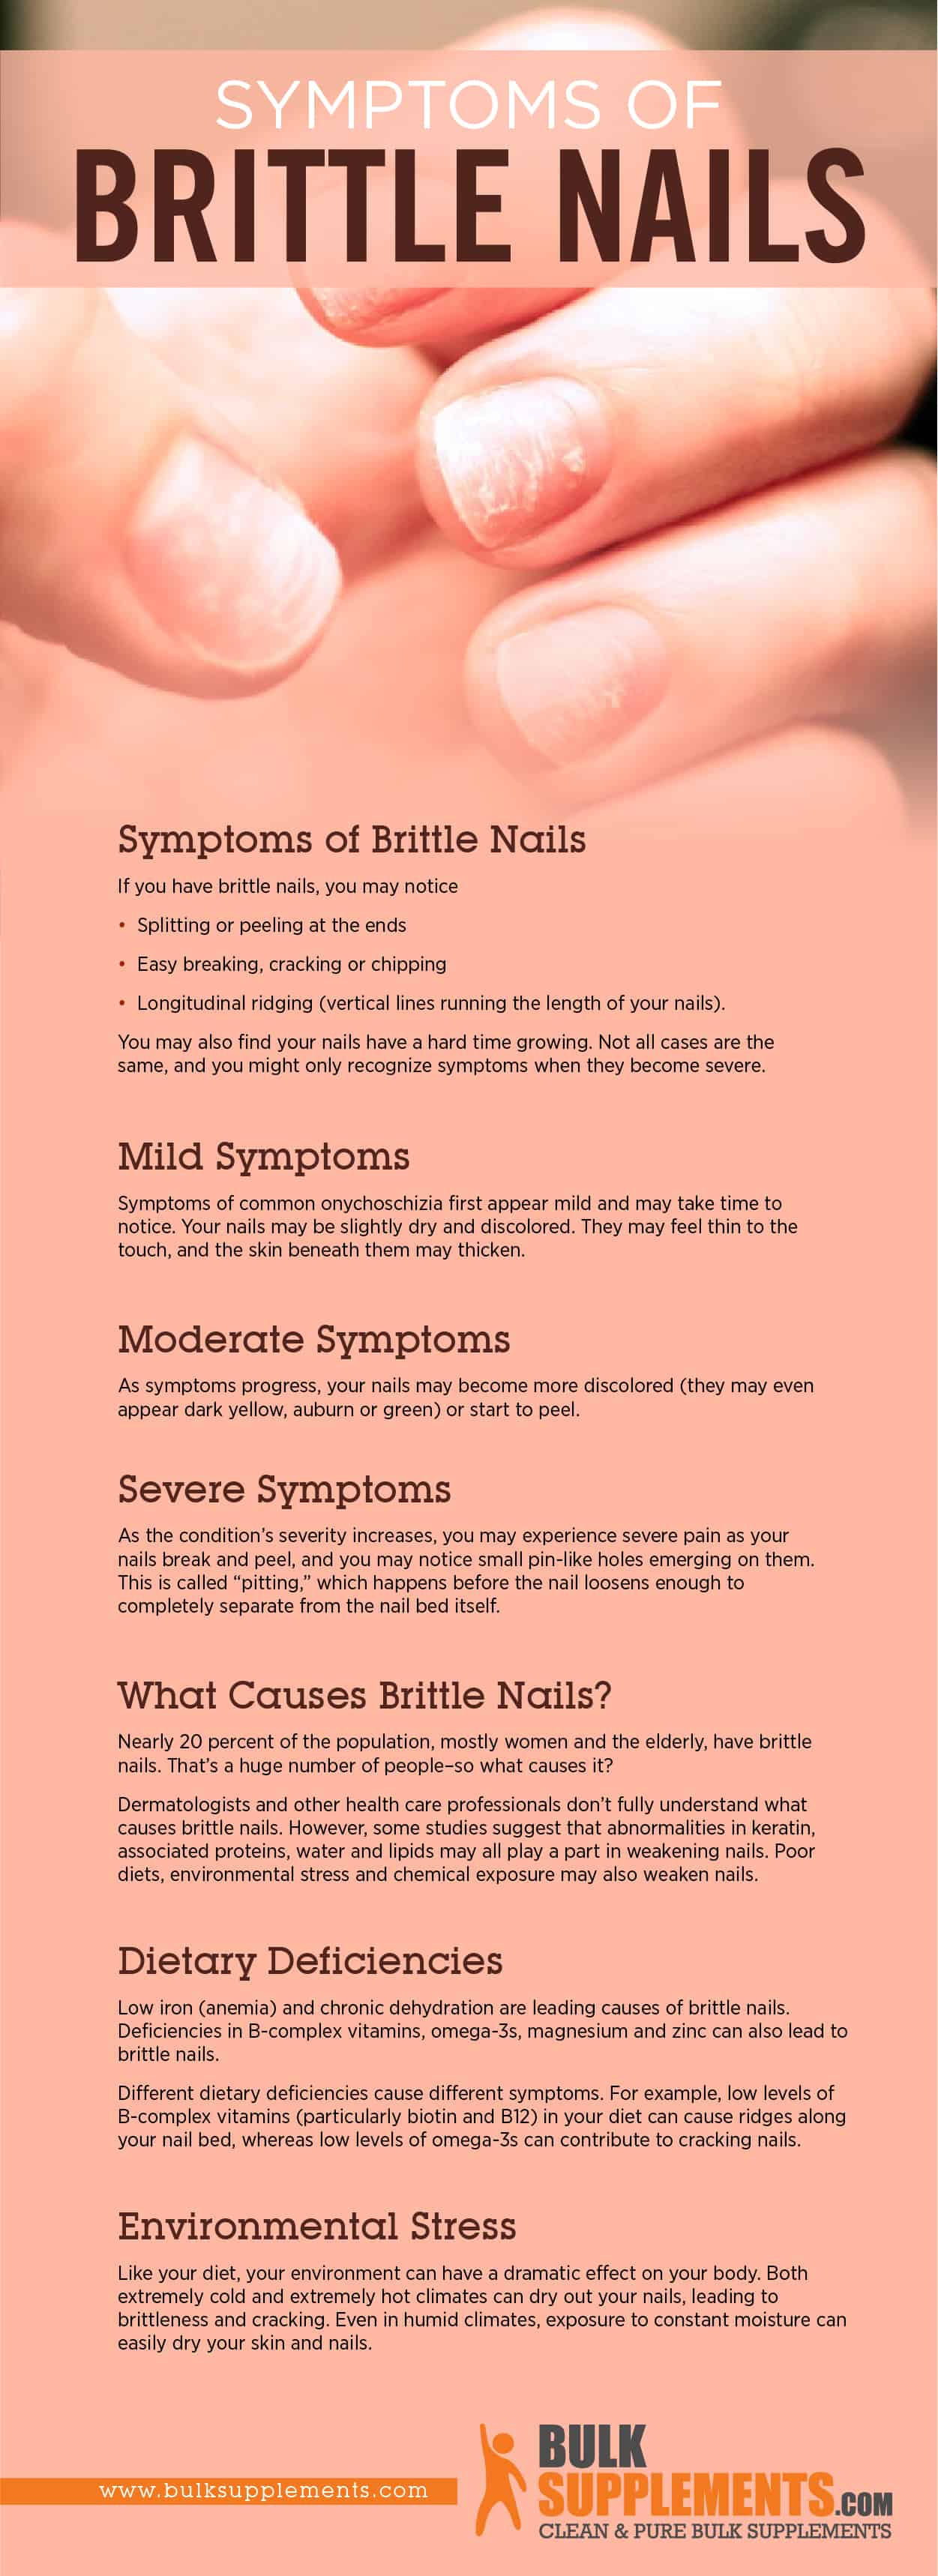 Блог :: Brittle nails: causes, methods of treatment